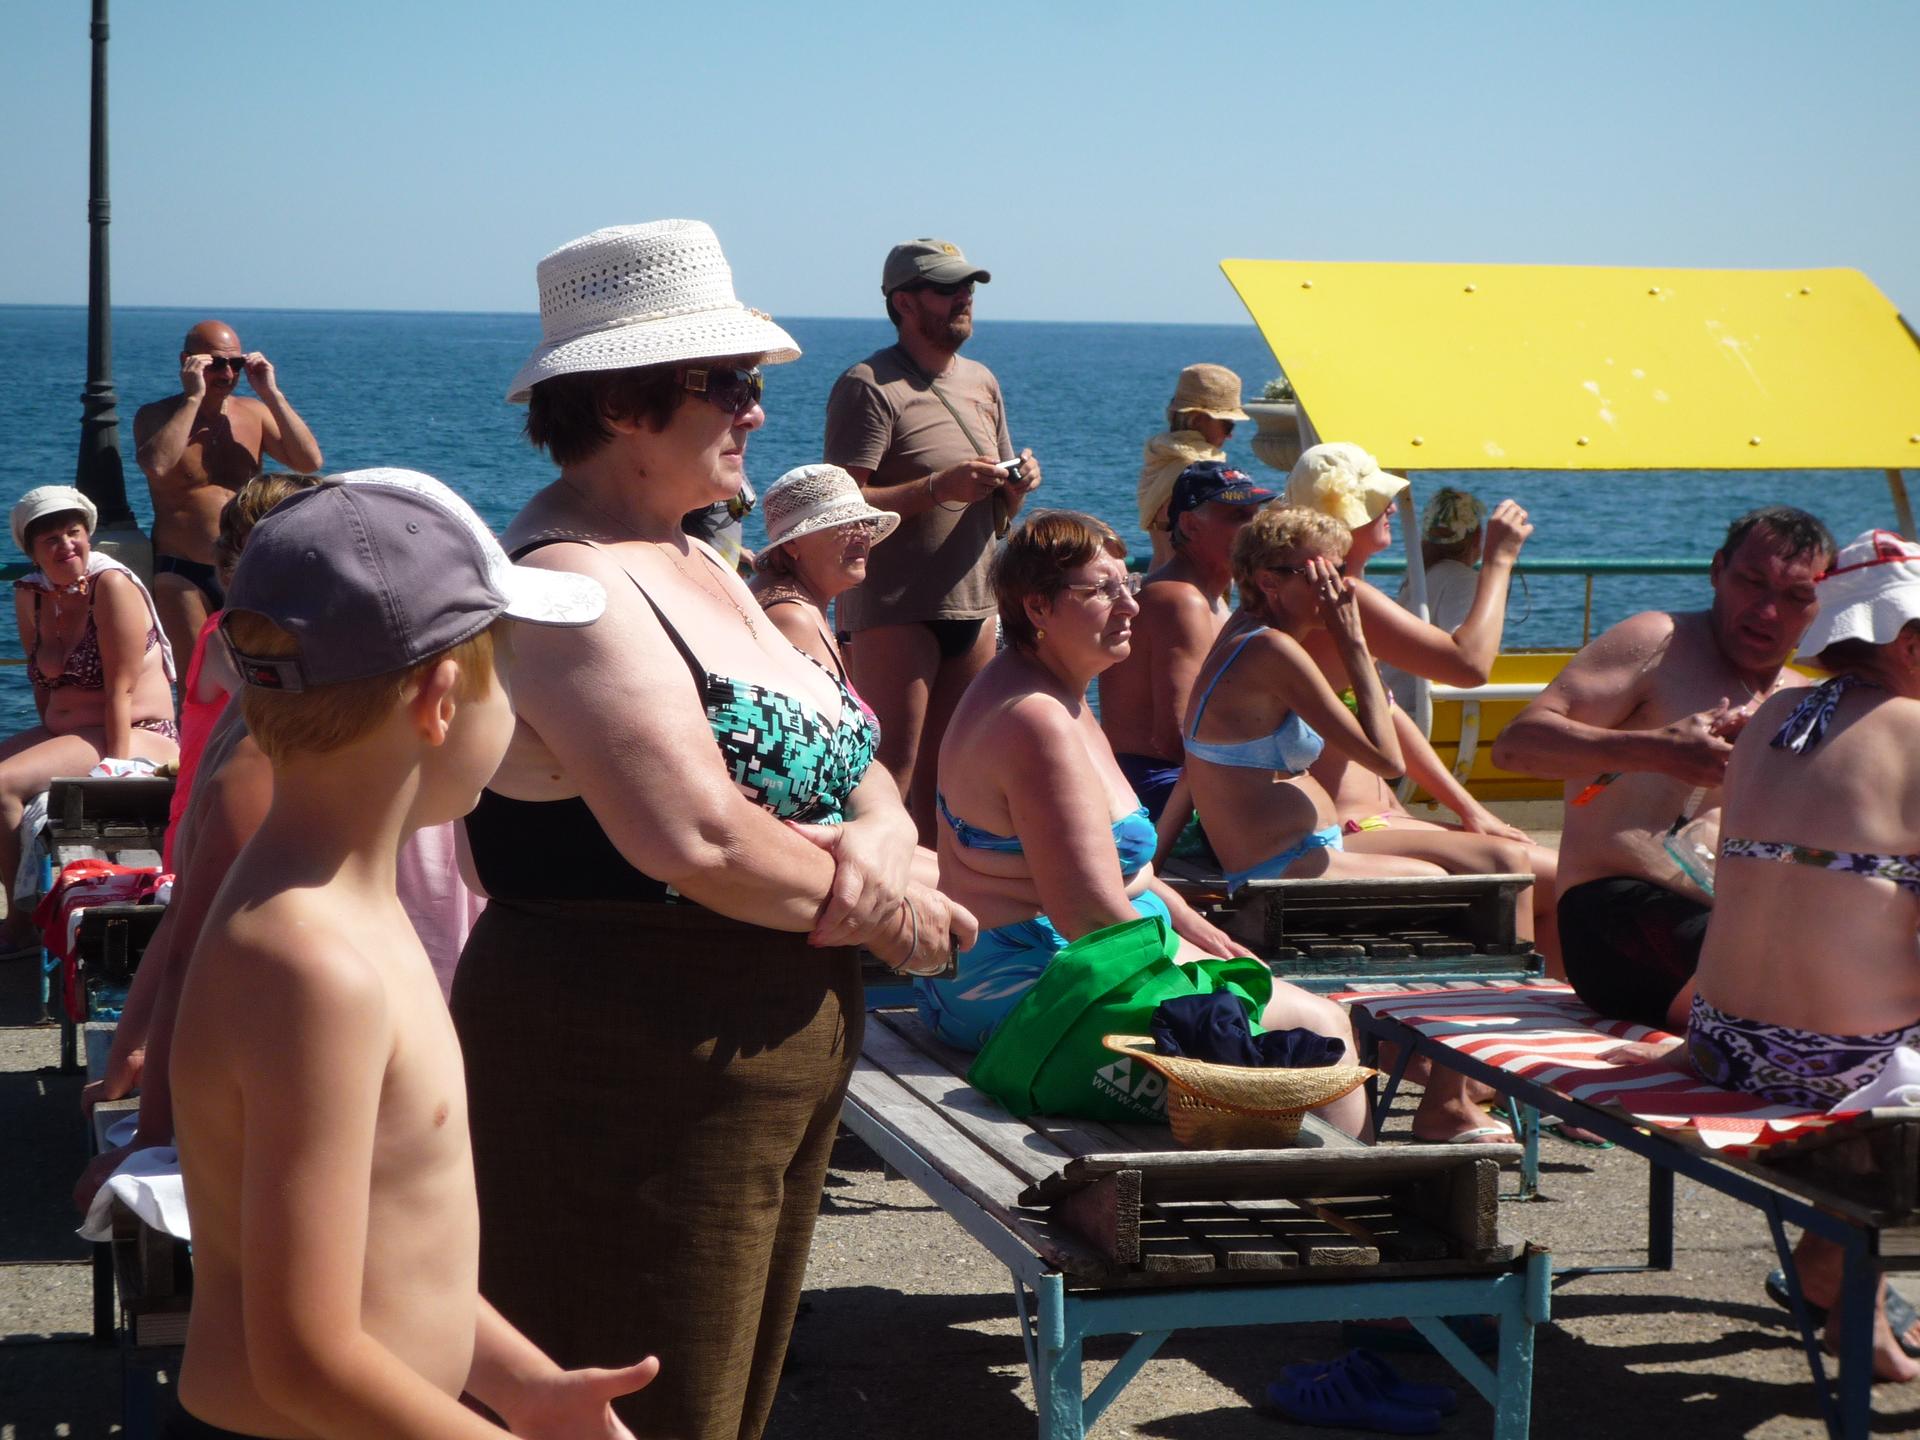 Tourists on the beach in Yalta, a Crimean resort.